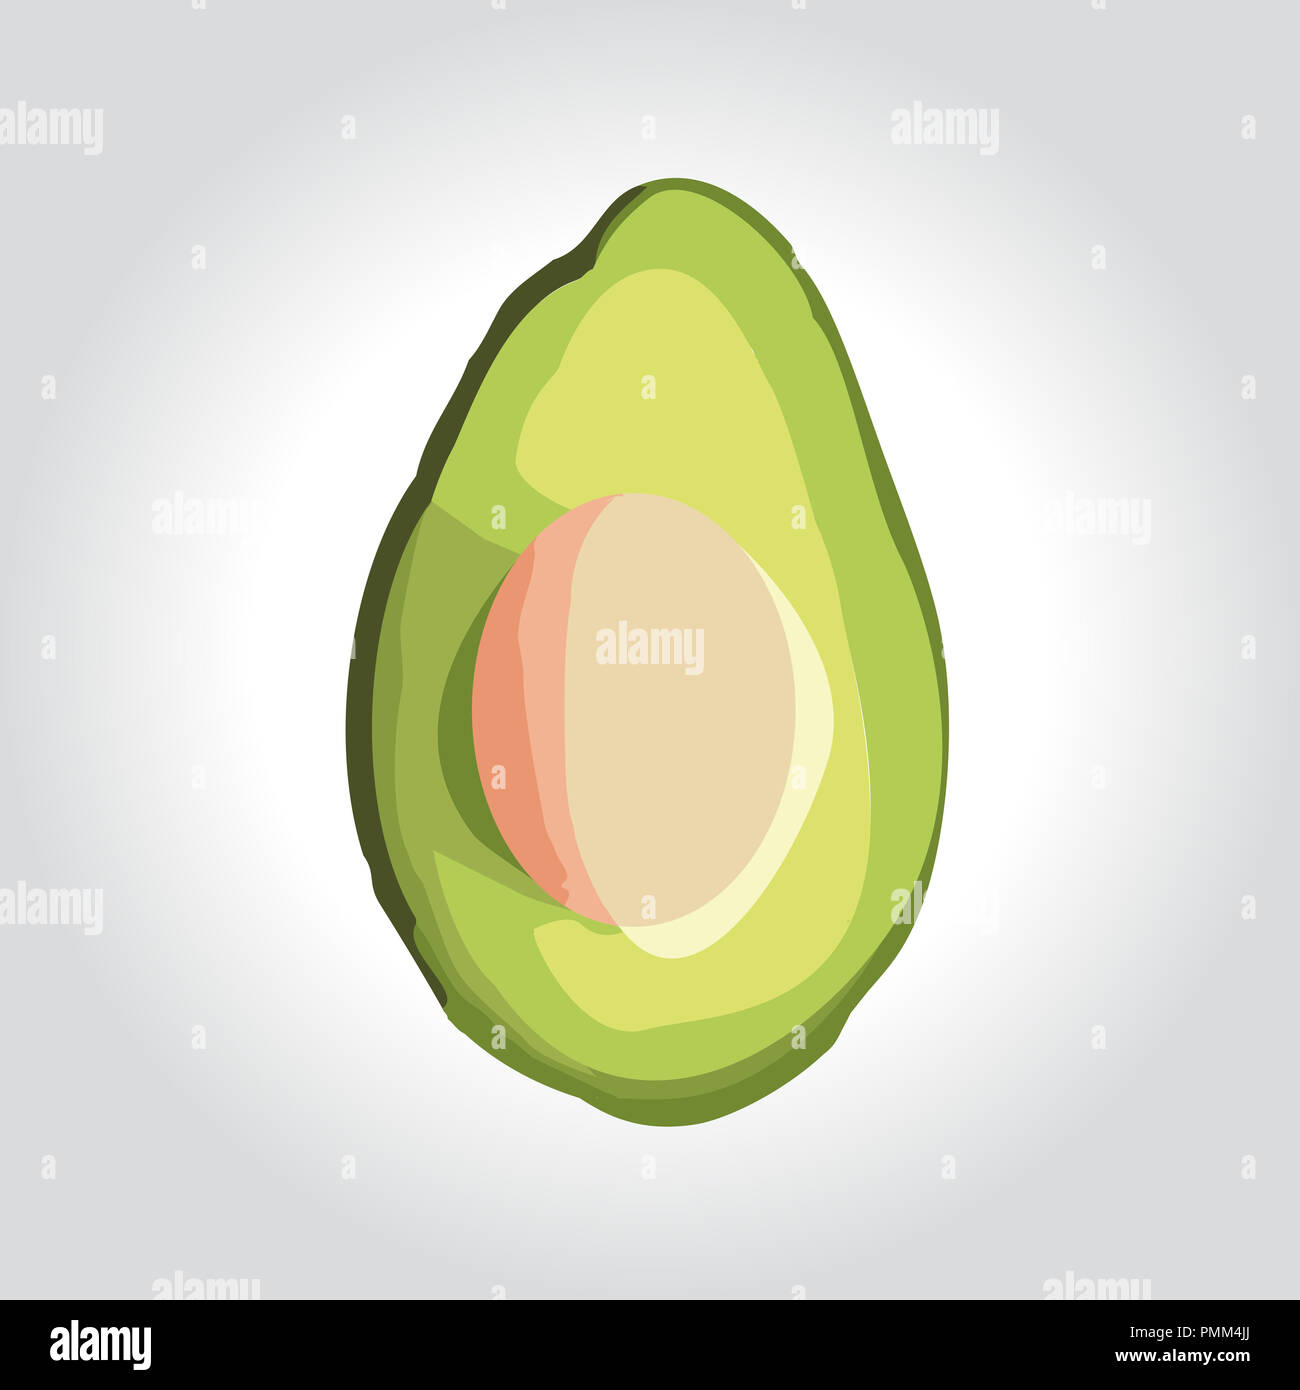 Close up of avocado sliced in half for background. illustration design graphic Stock Photo